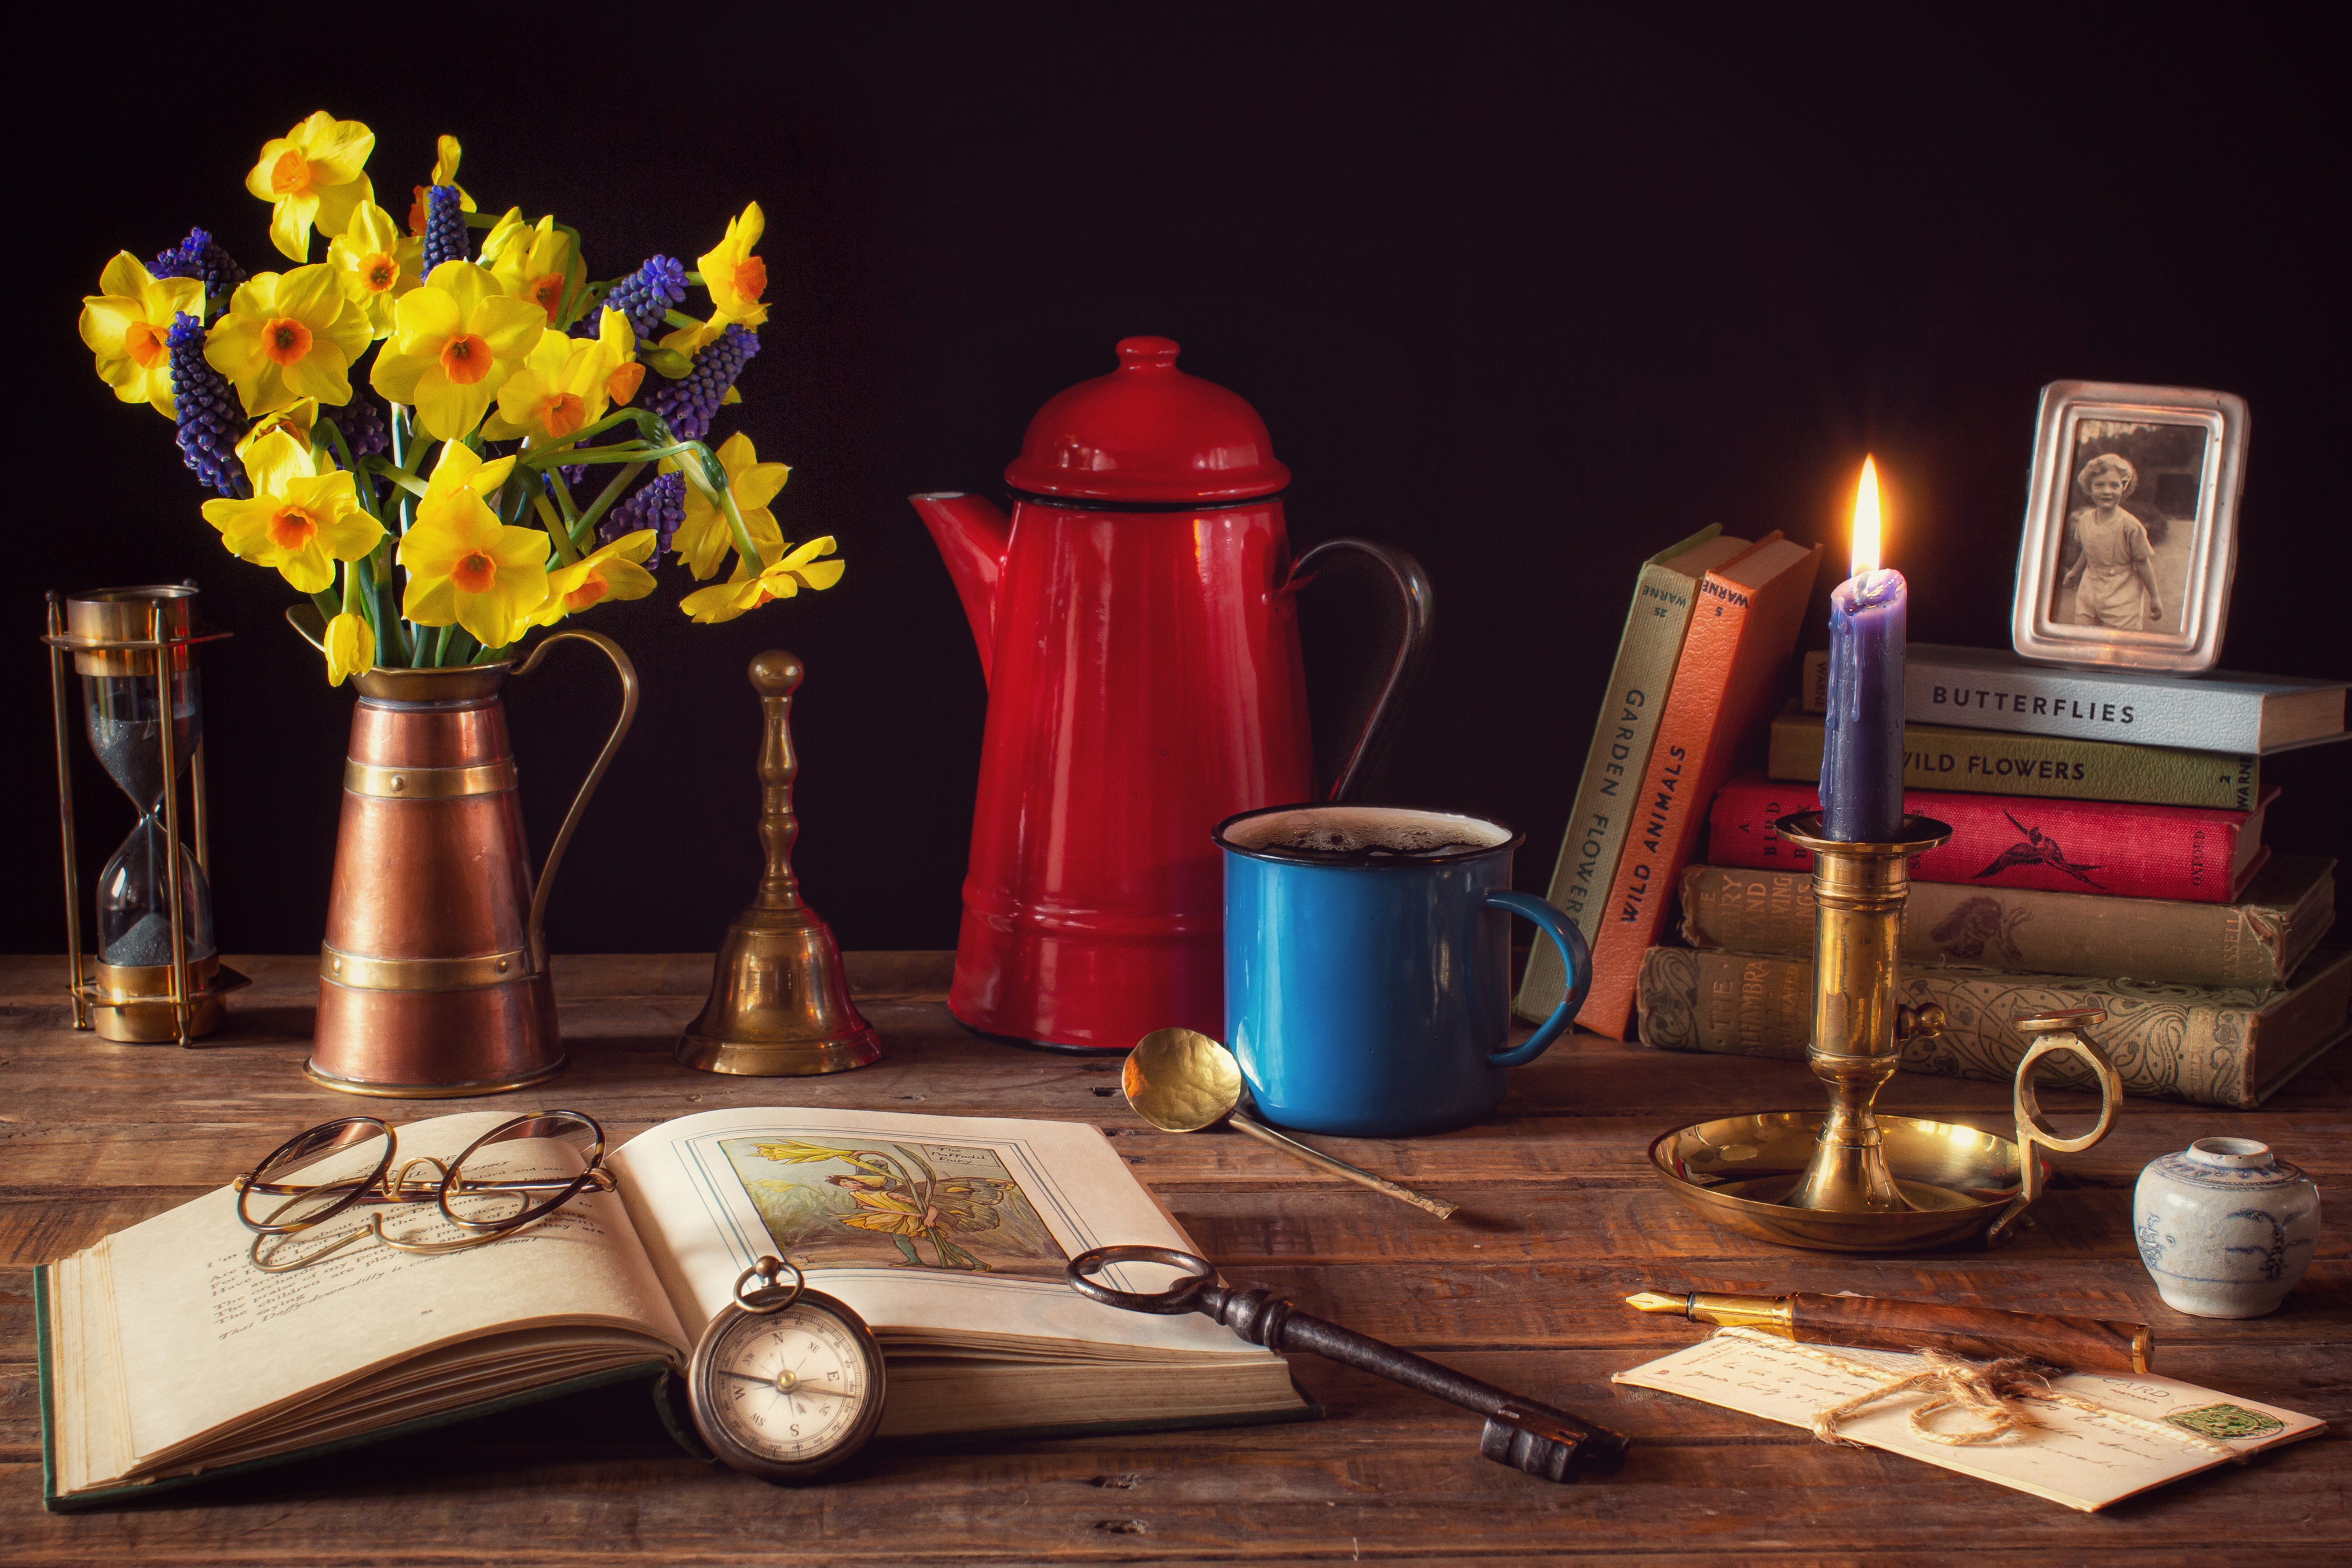 Book Candle Compass Daffodil Glasses Key Pitcher 4200x2800